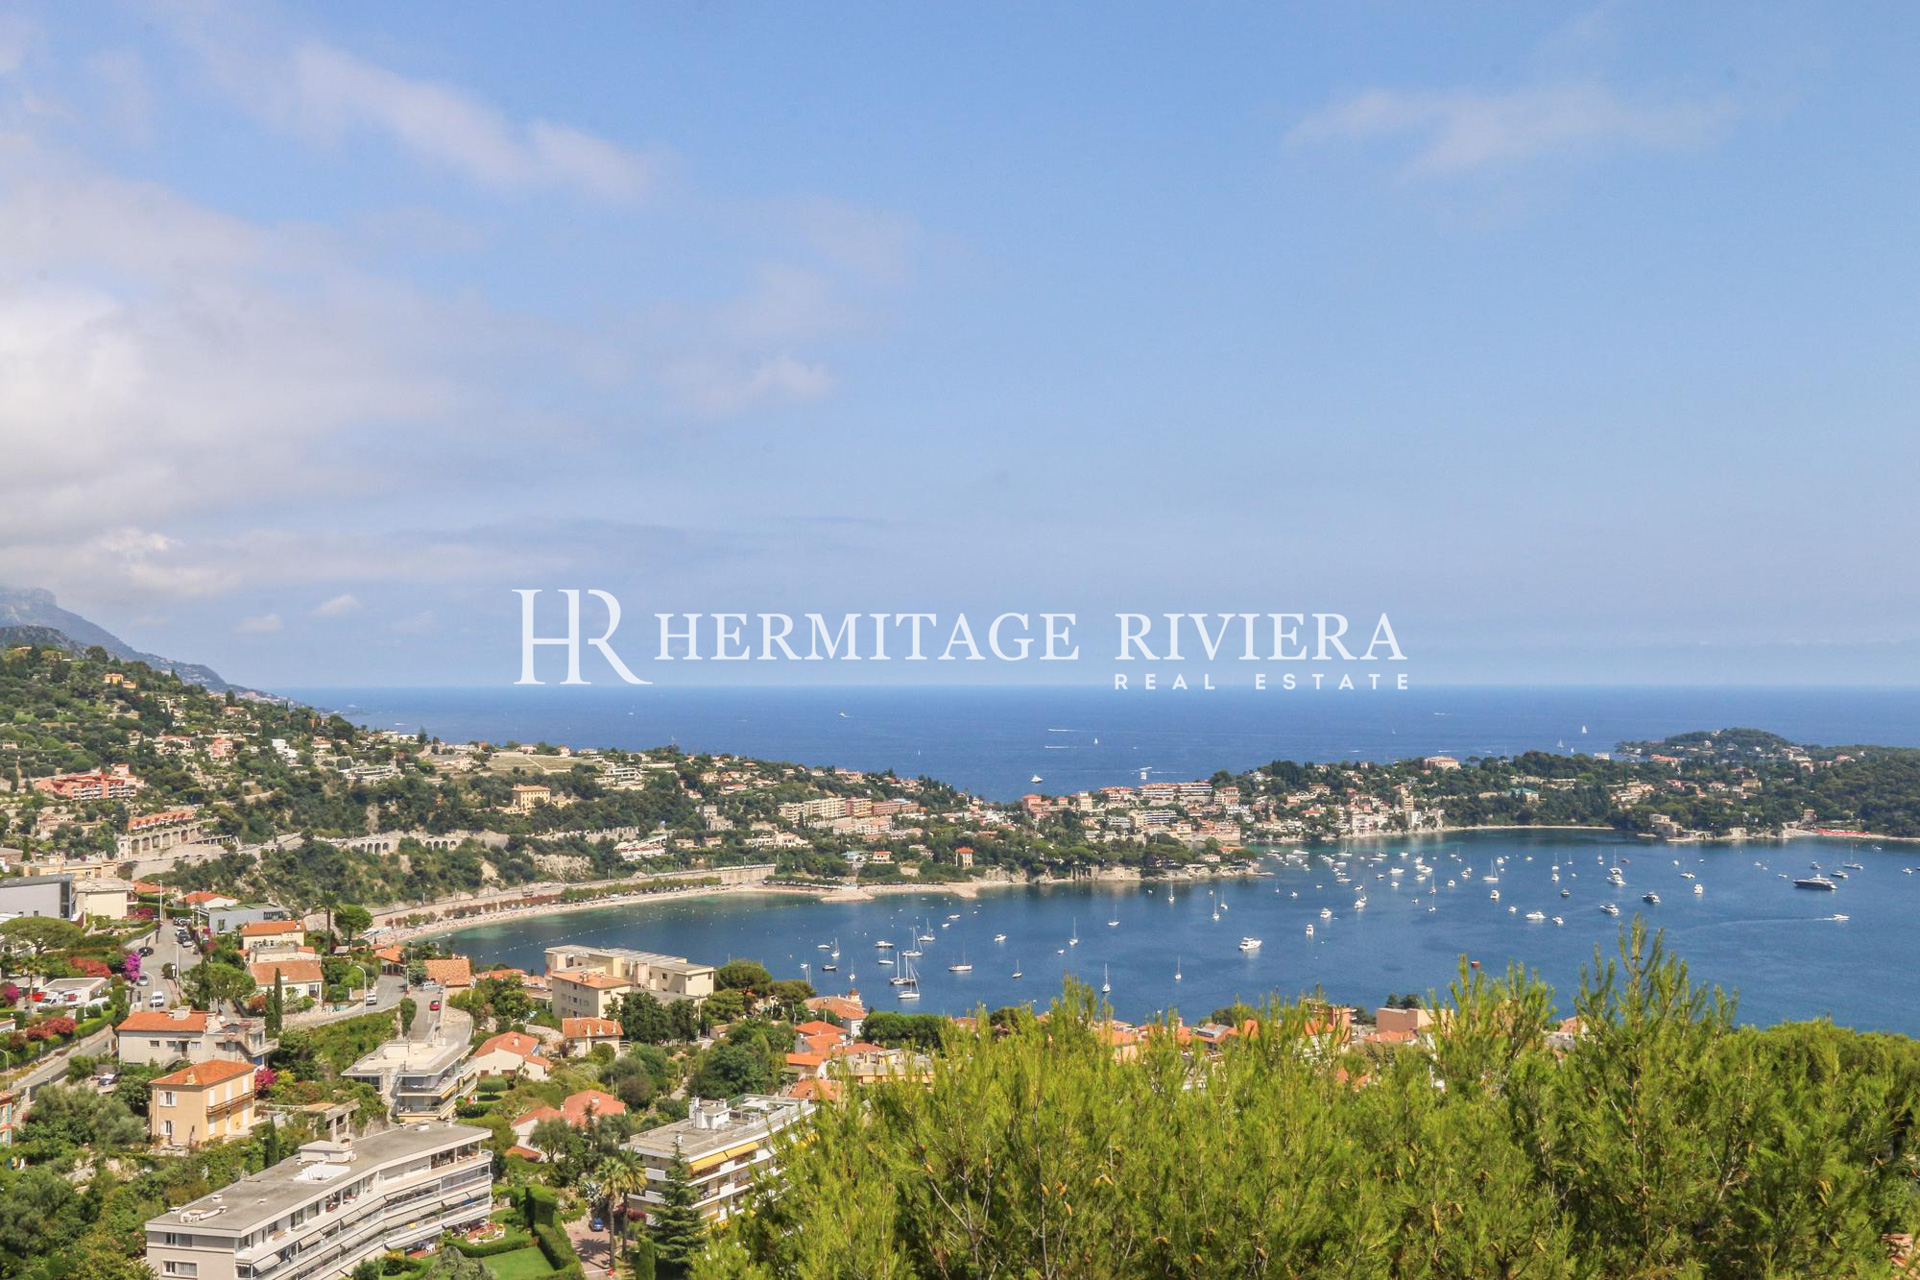 Villa with bay view of Villefranche (image 1)